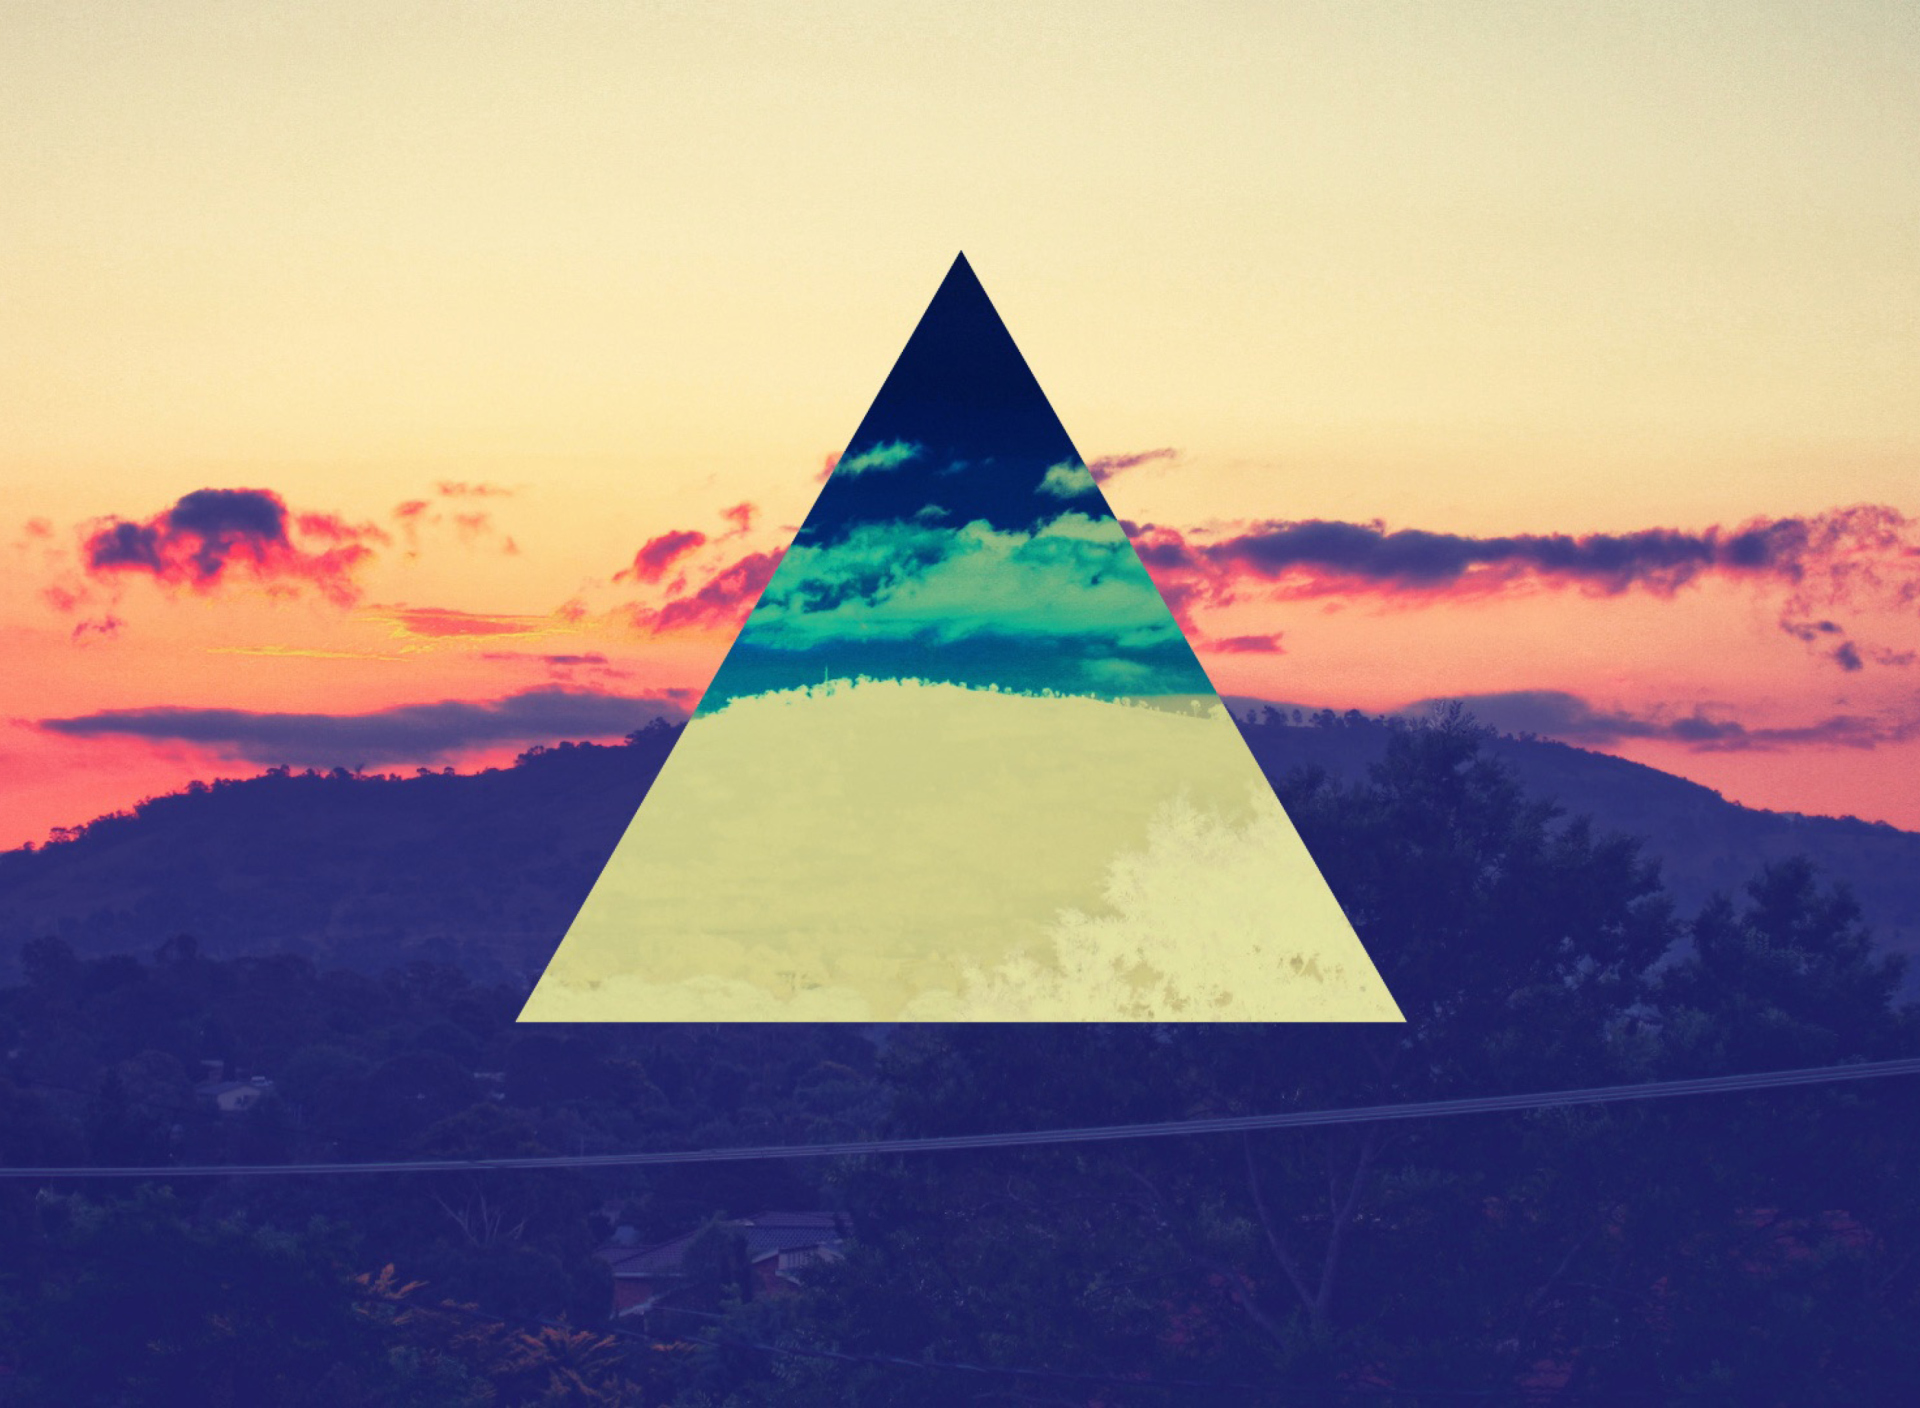 Das Sunset Inverted Colour Triangle Wallpaper 1920x1408